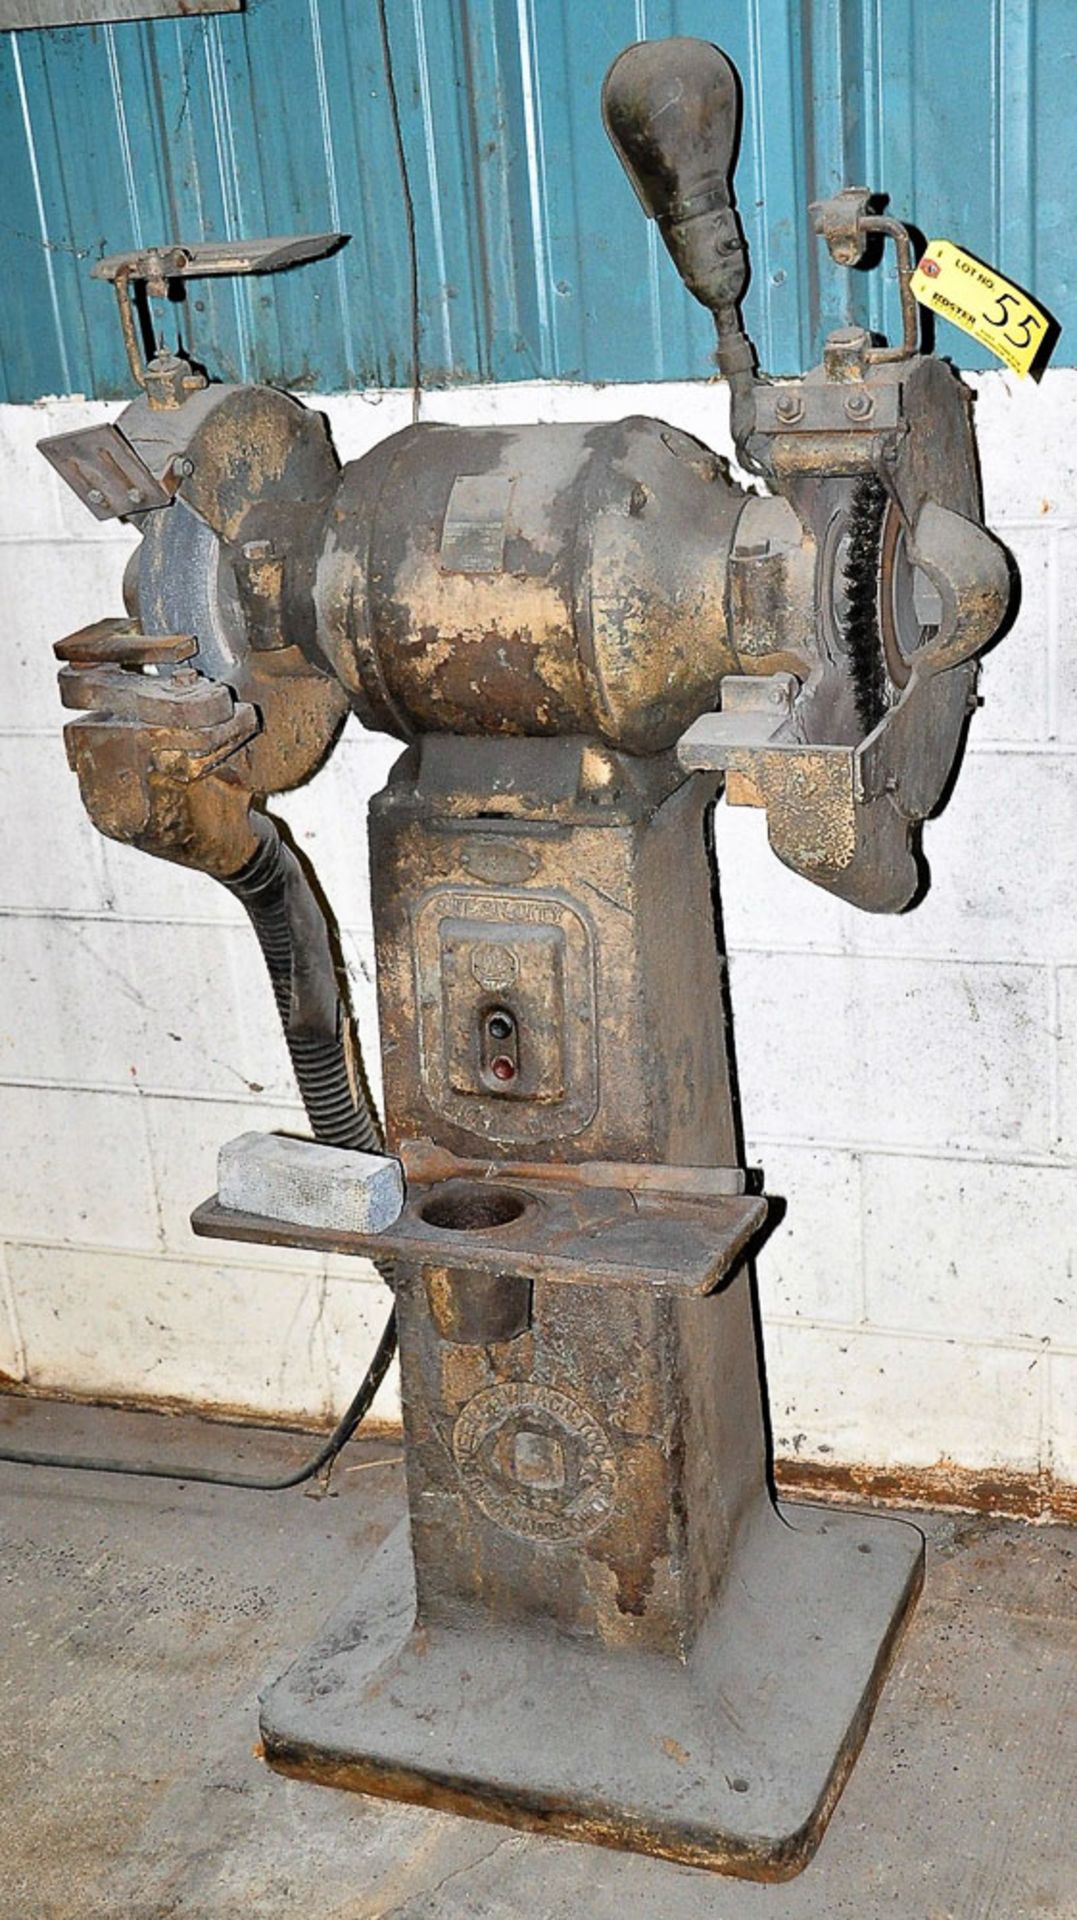 QUEEN CITY APPROXIMATELY 2HP DOUBLE END PEDESTAL GRINDER